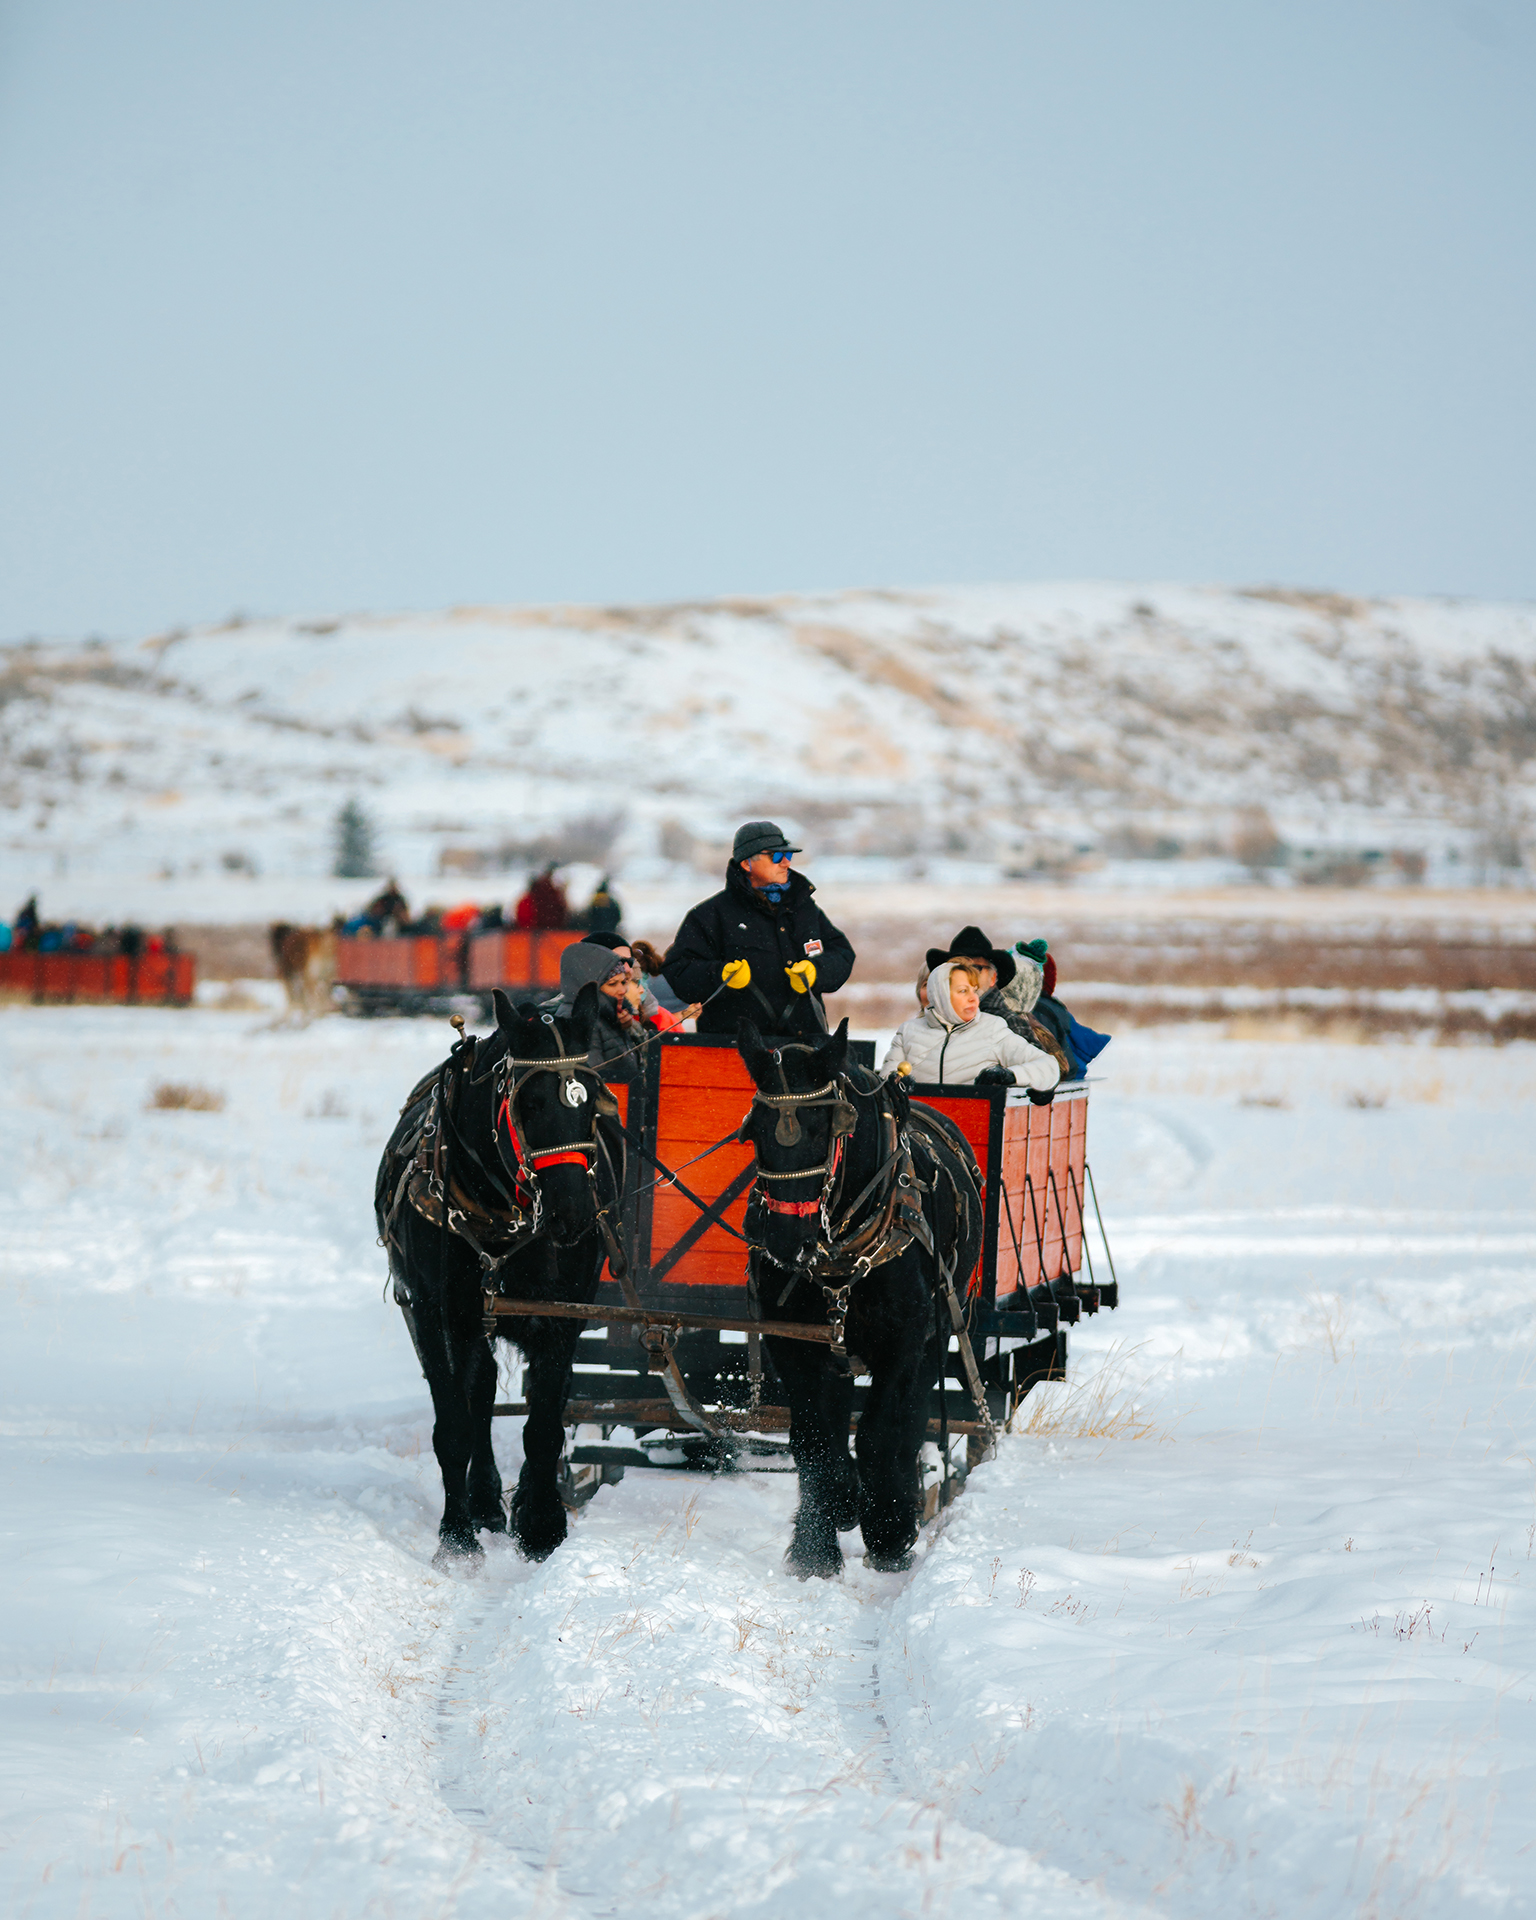 elk refuge sleigh ride - things to do in jackson hole